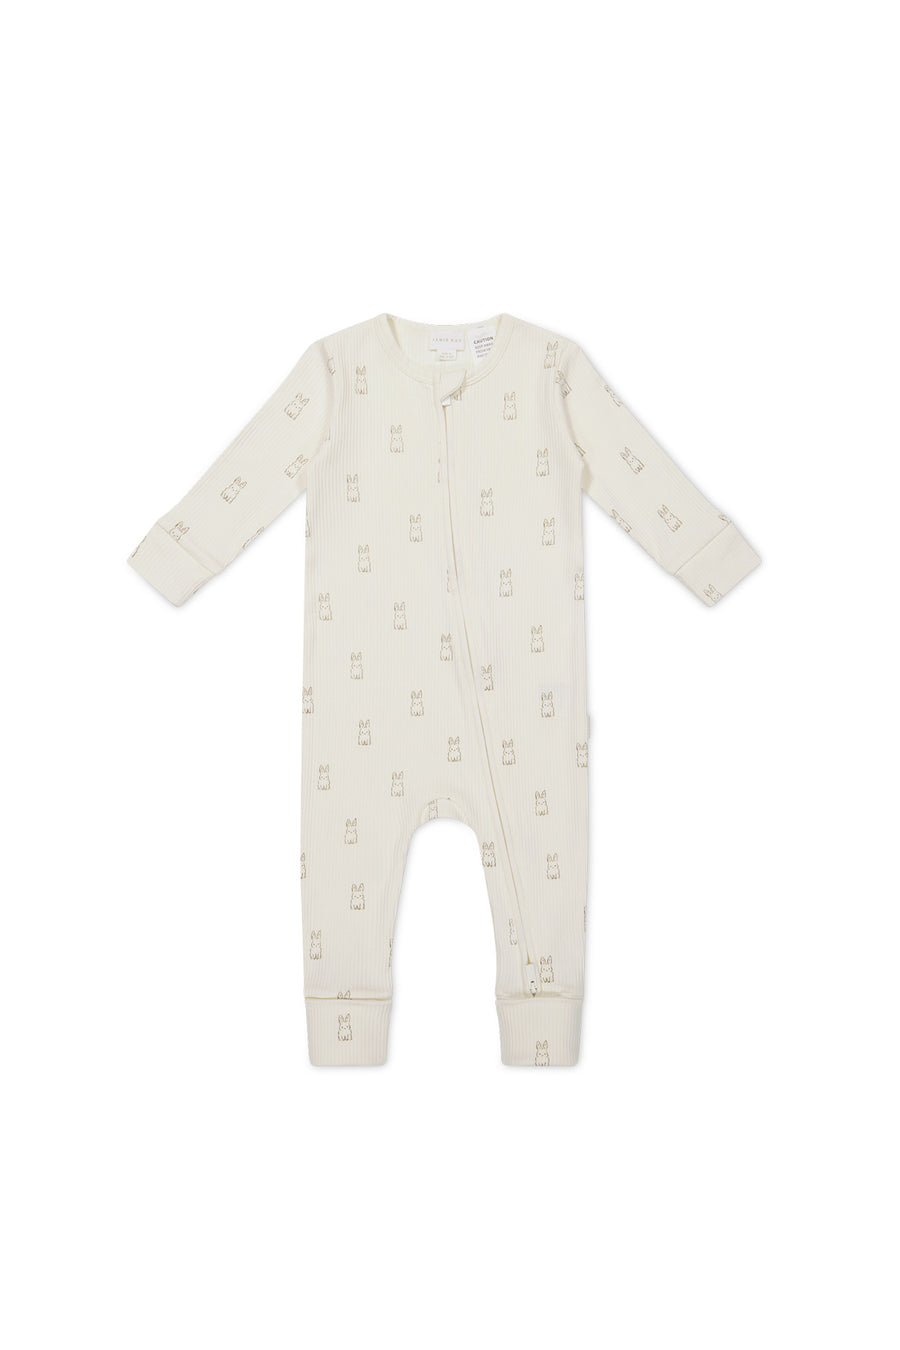 Organic Cotton Modal Reese Onepiece - Bunny Buddies Childrens Onepiece from Jamie Kay NZ